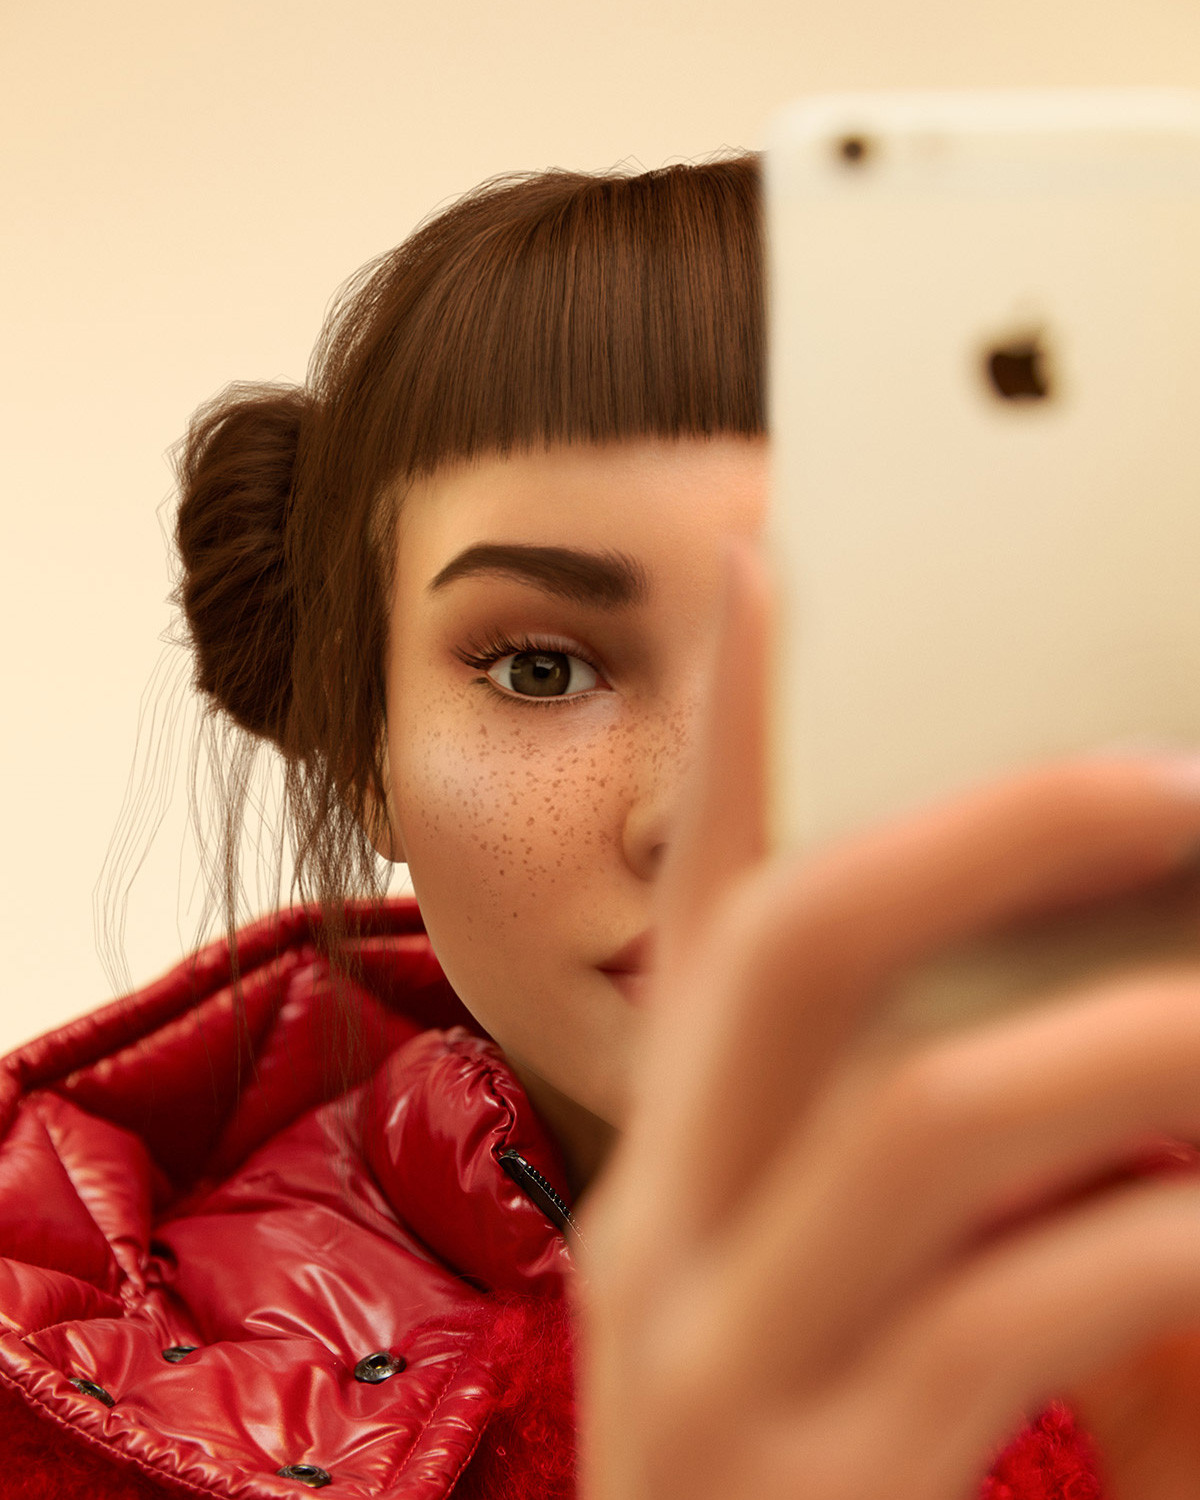 Is the future of influencer marketing virtual reality influencers? - Sideqik